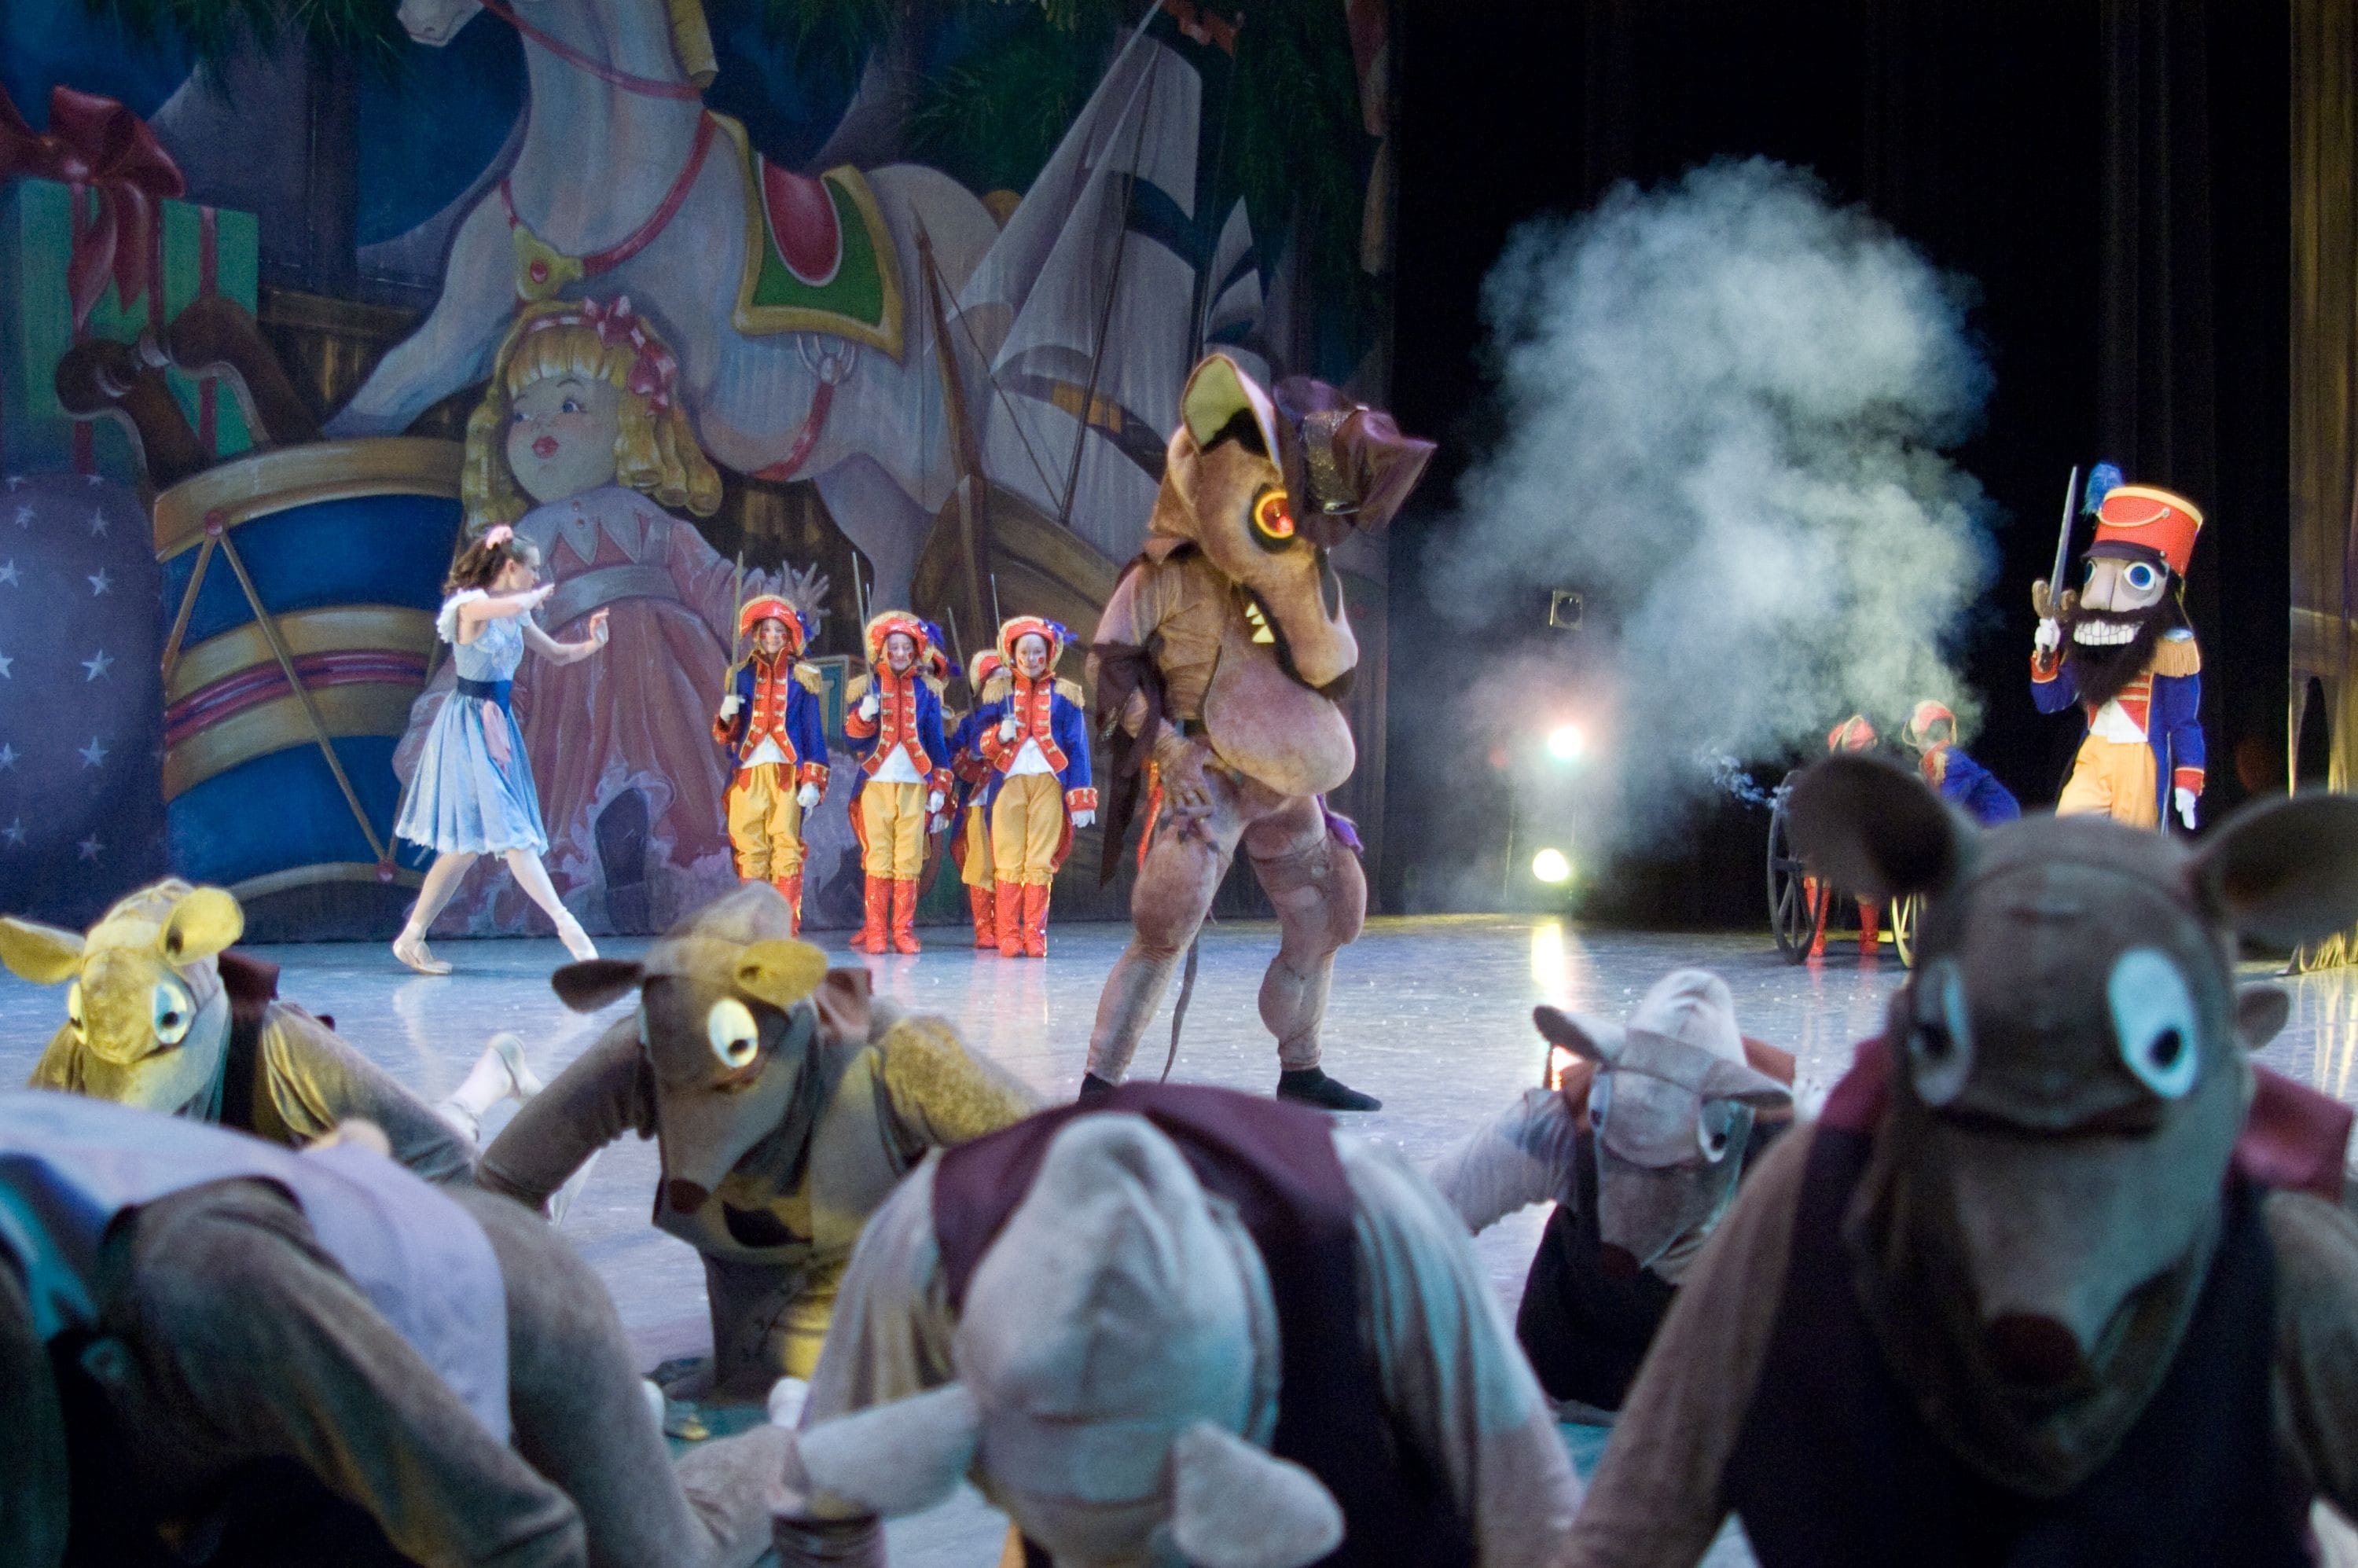 Minnesota Ballet's production of the Nutcracker with lighting design by Ken Pogin